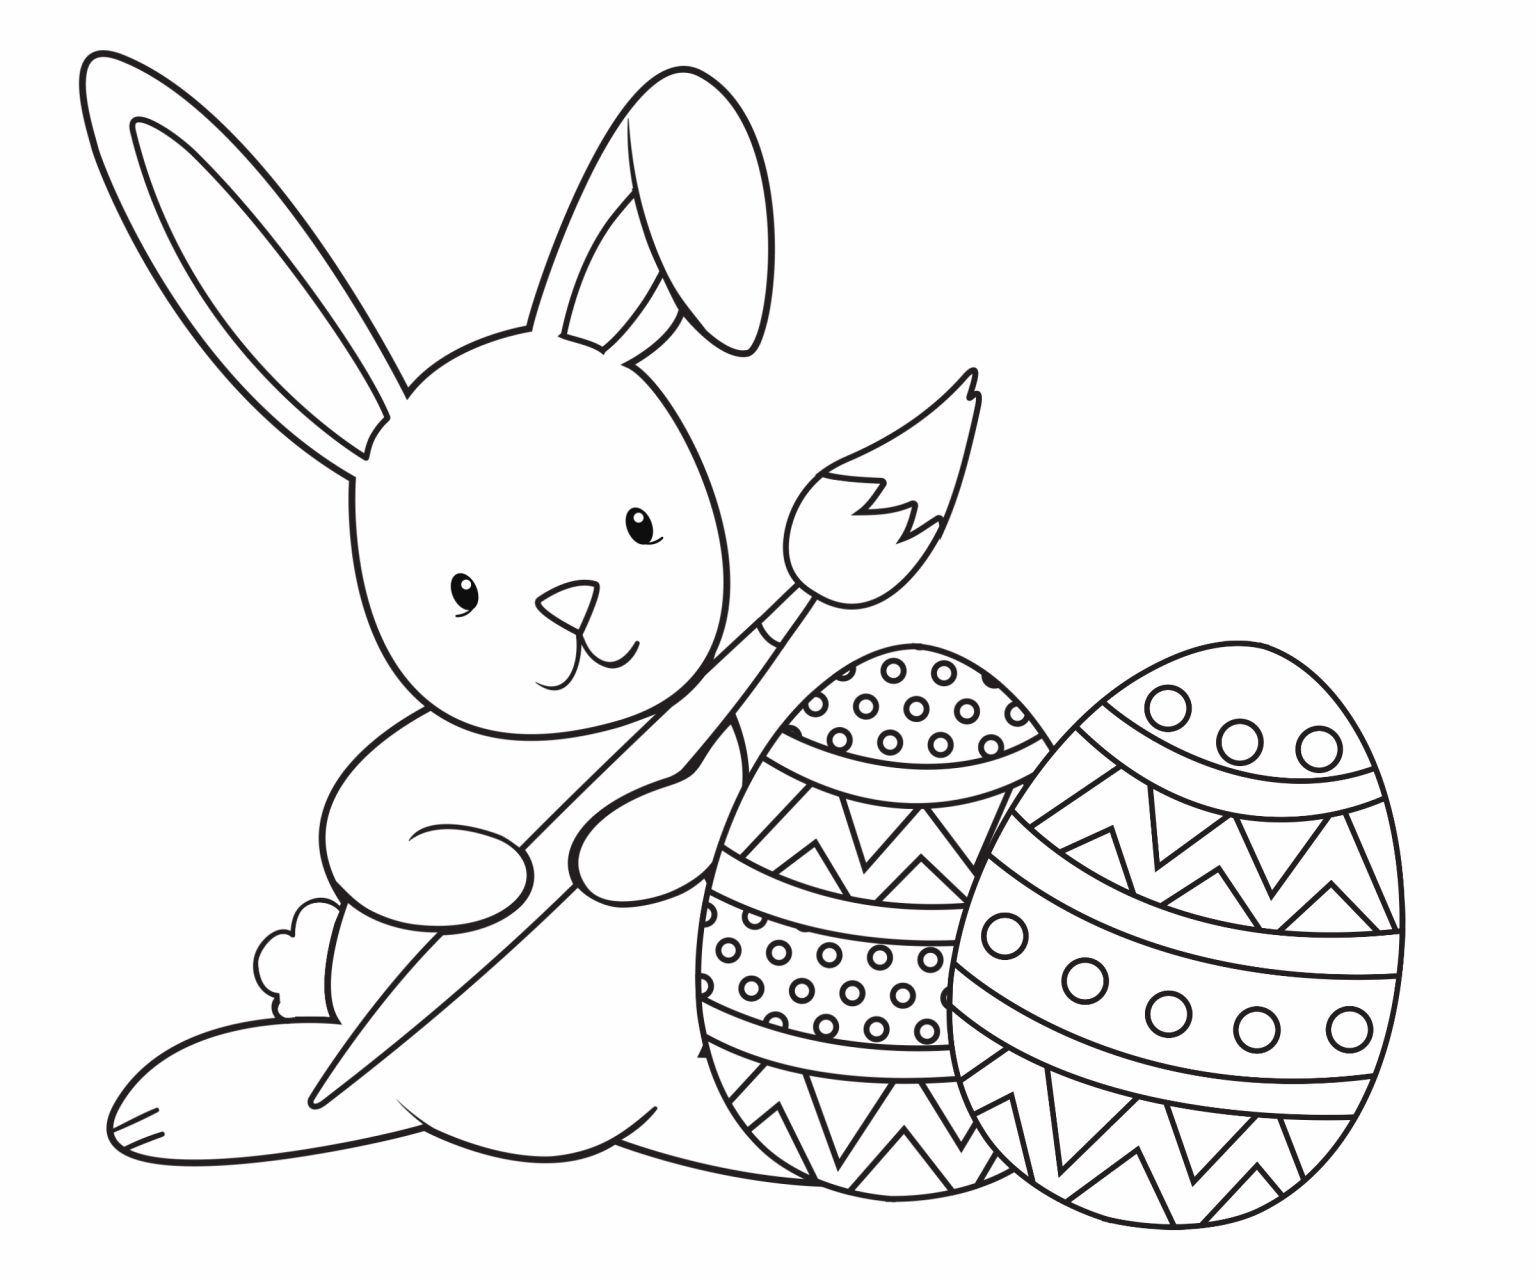 Printable Easter Coloring Pages for Preschoolers, Toddlers, Students